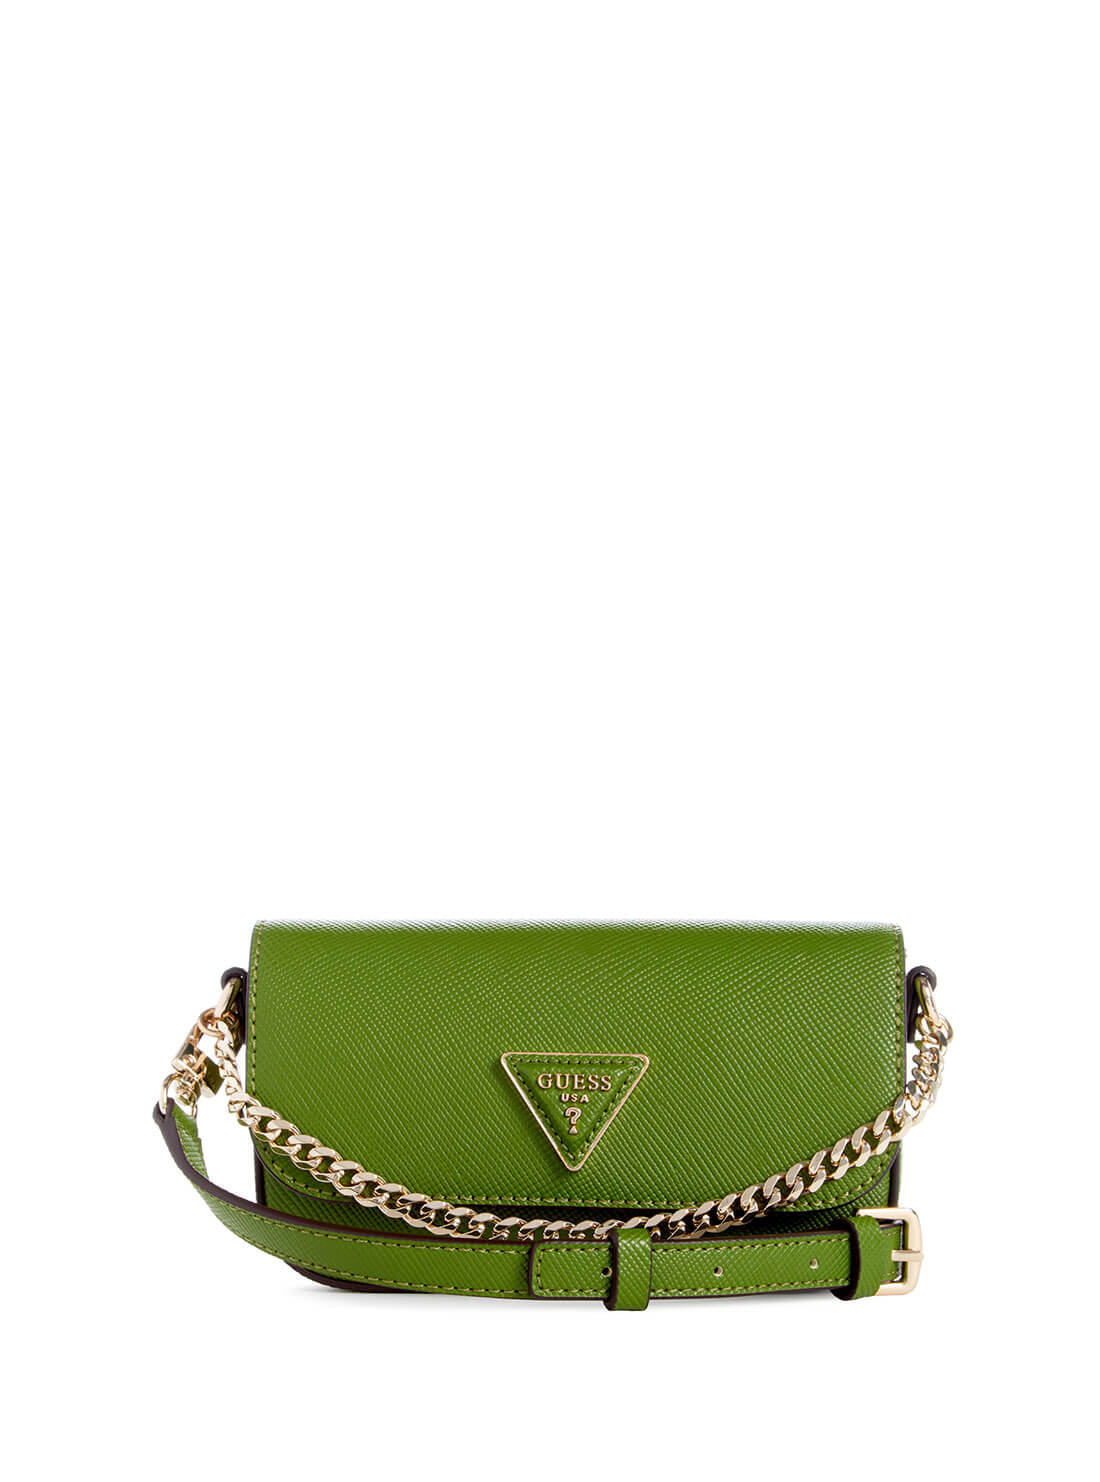 Women's Green Brynlee Micro Mini Shoulder Bag front view